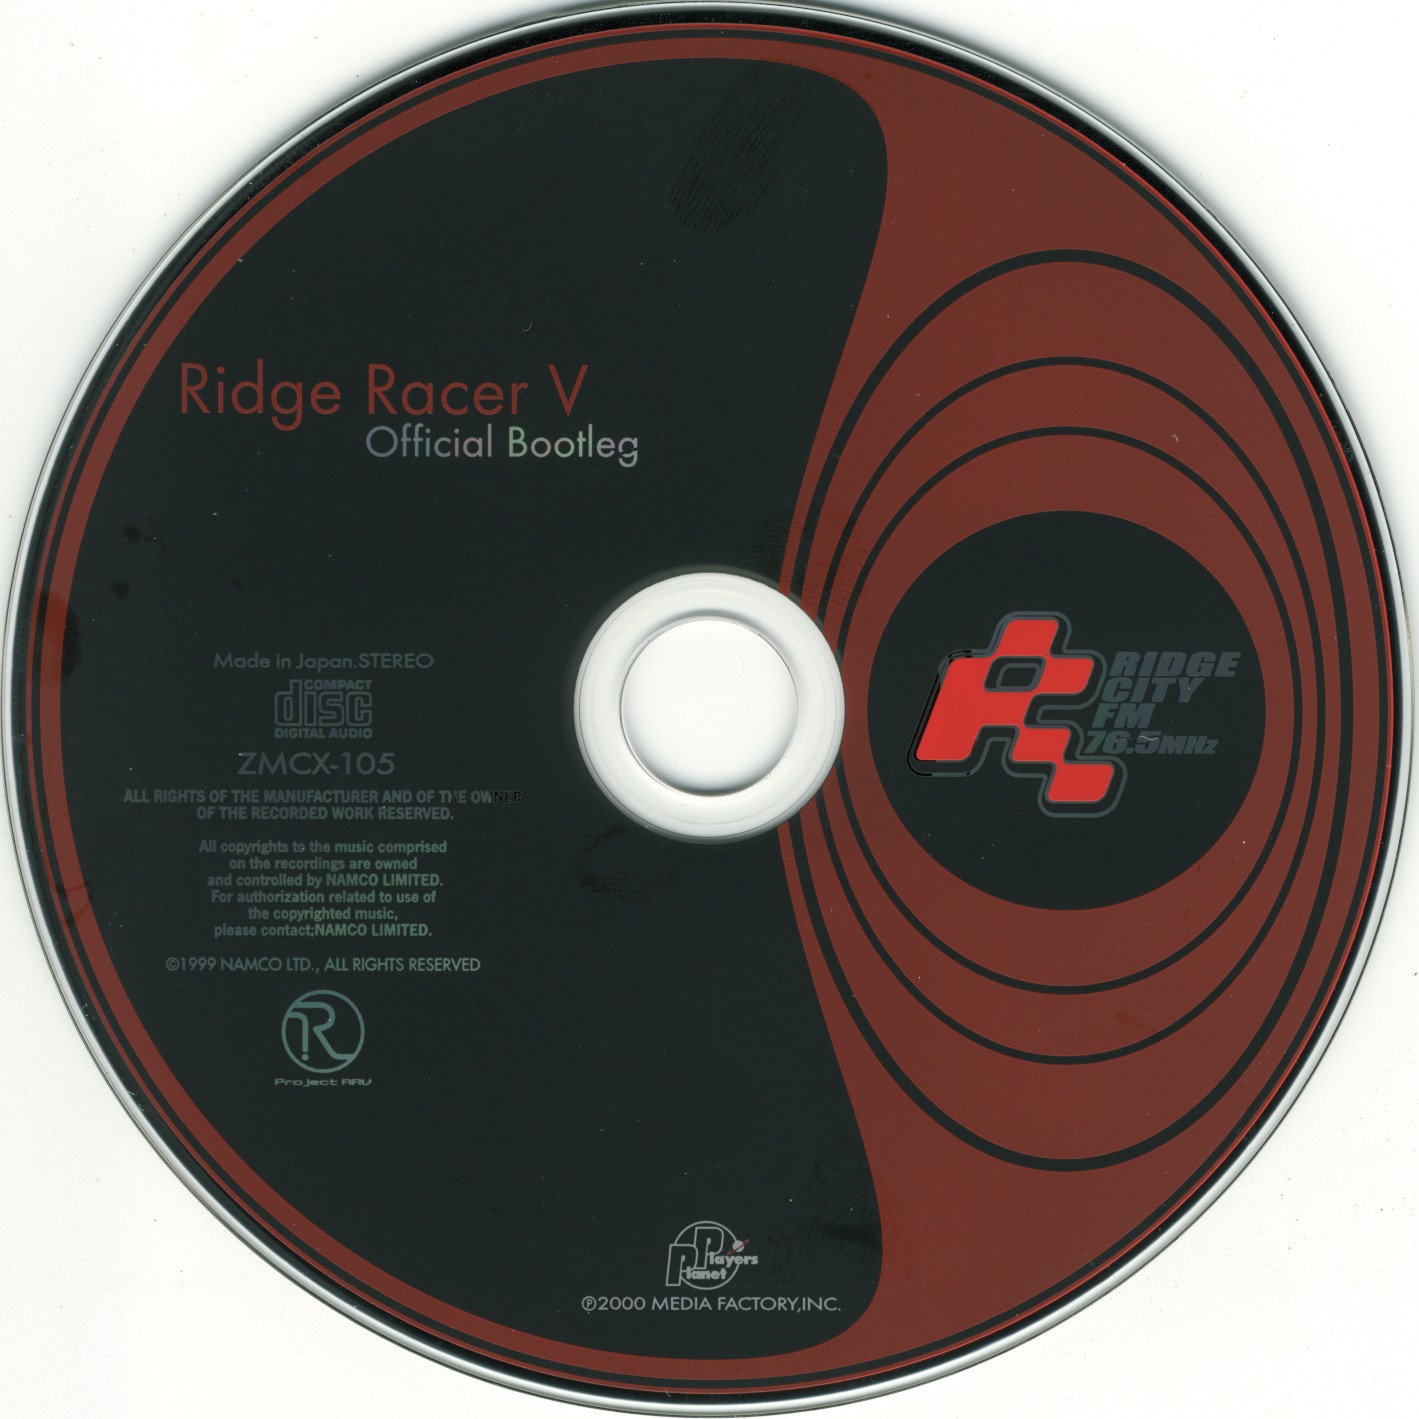 RIDGE RACER V Official Bootleg with DVD (2000) MP3 - Download 